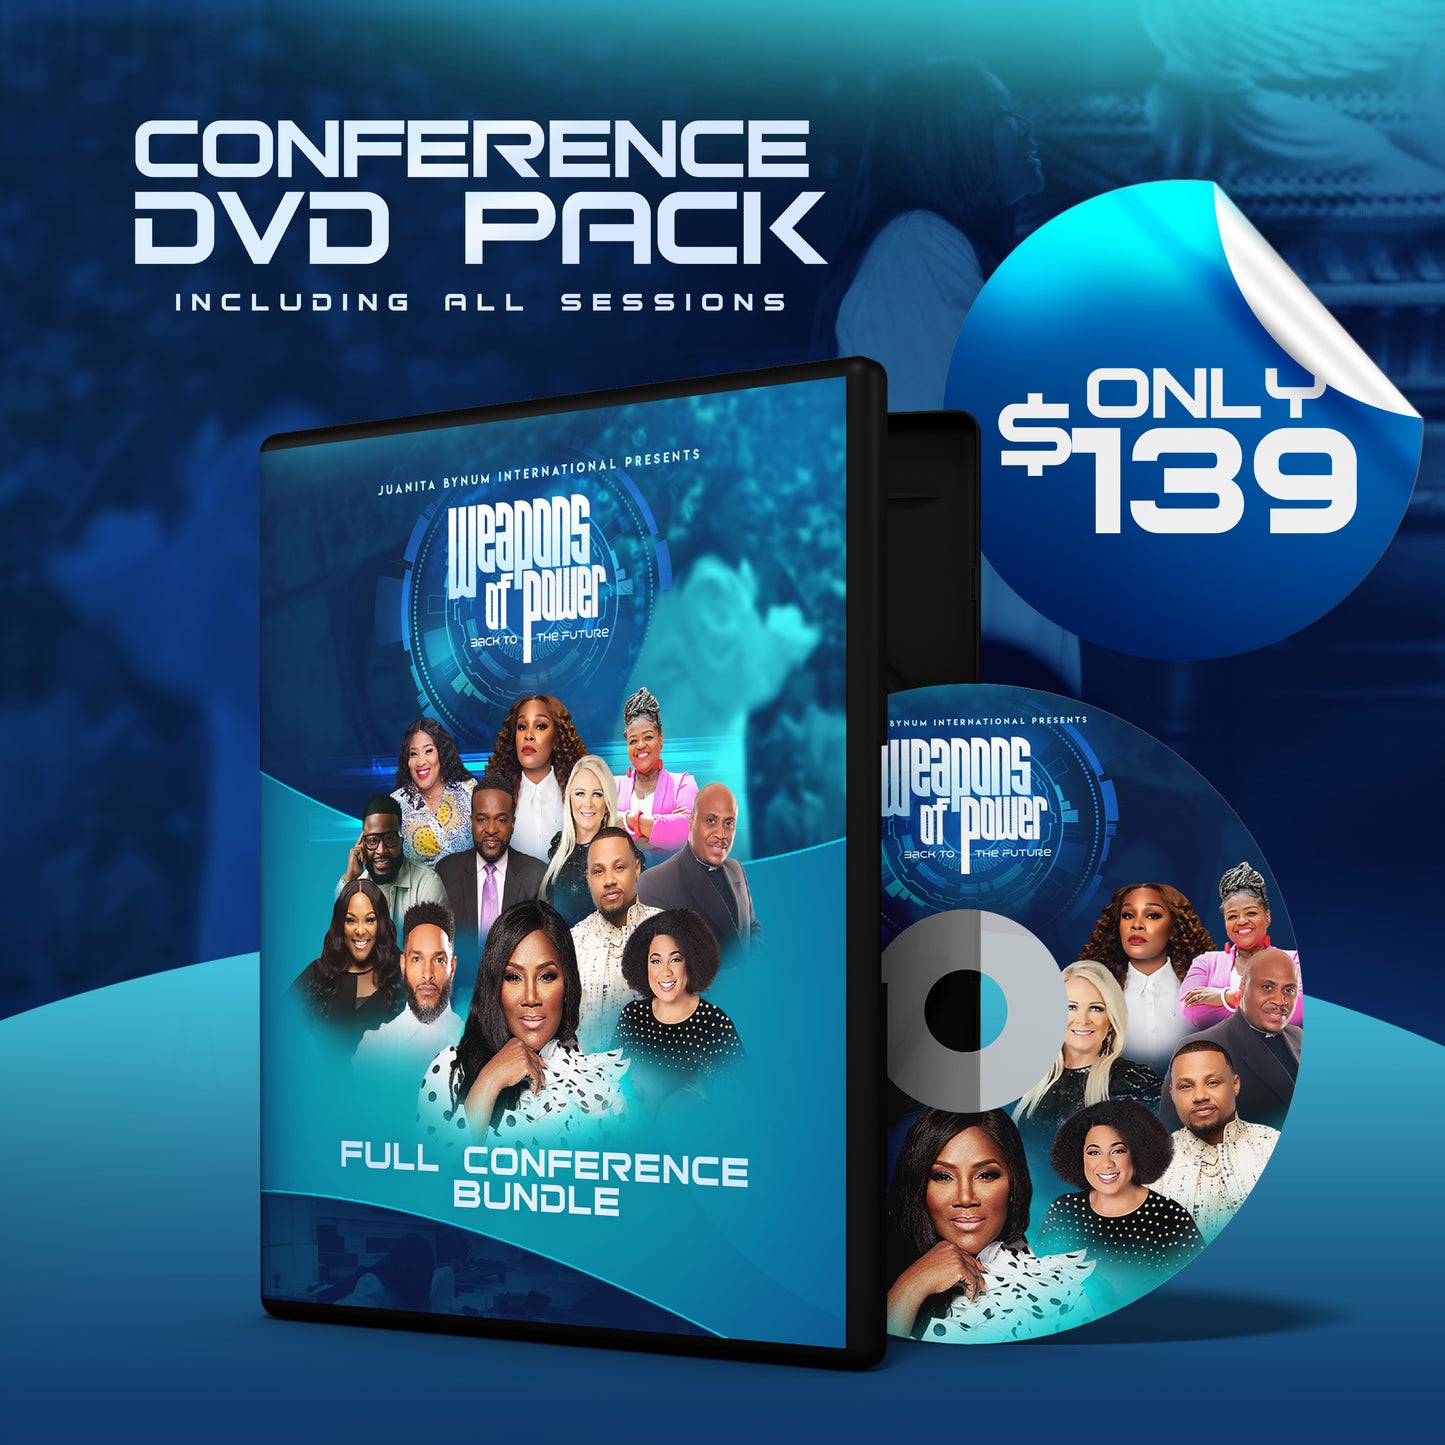 WEAPONS OF POWER DVD - Full Conference Only